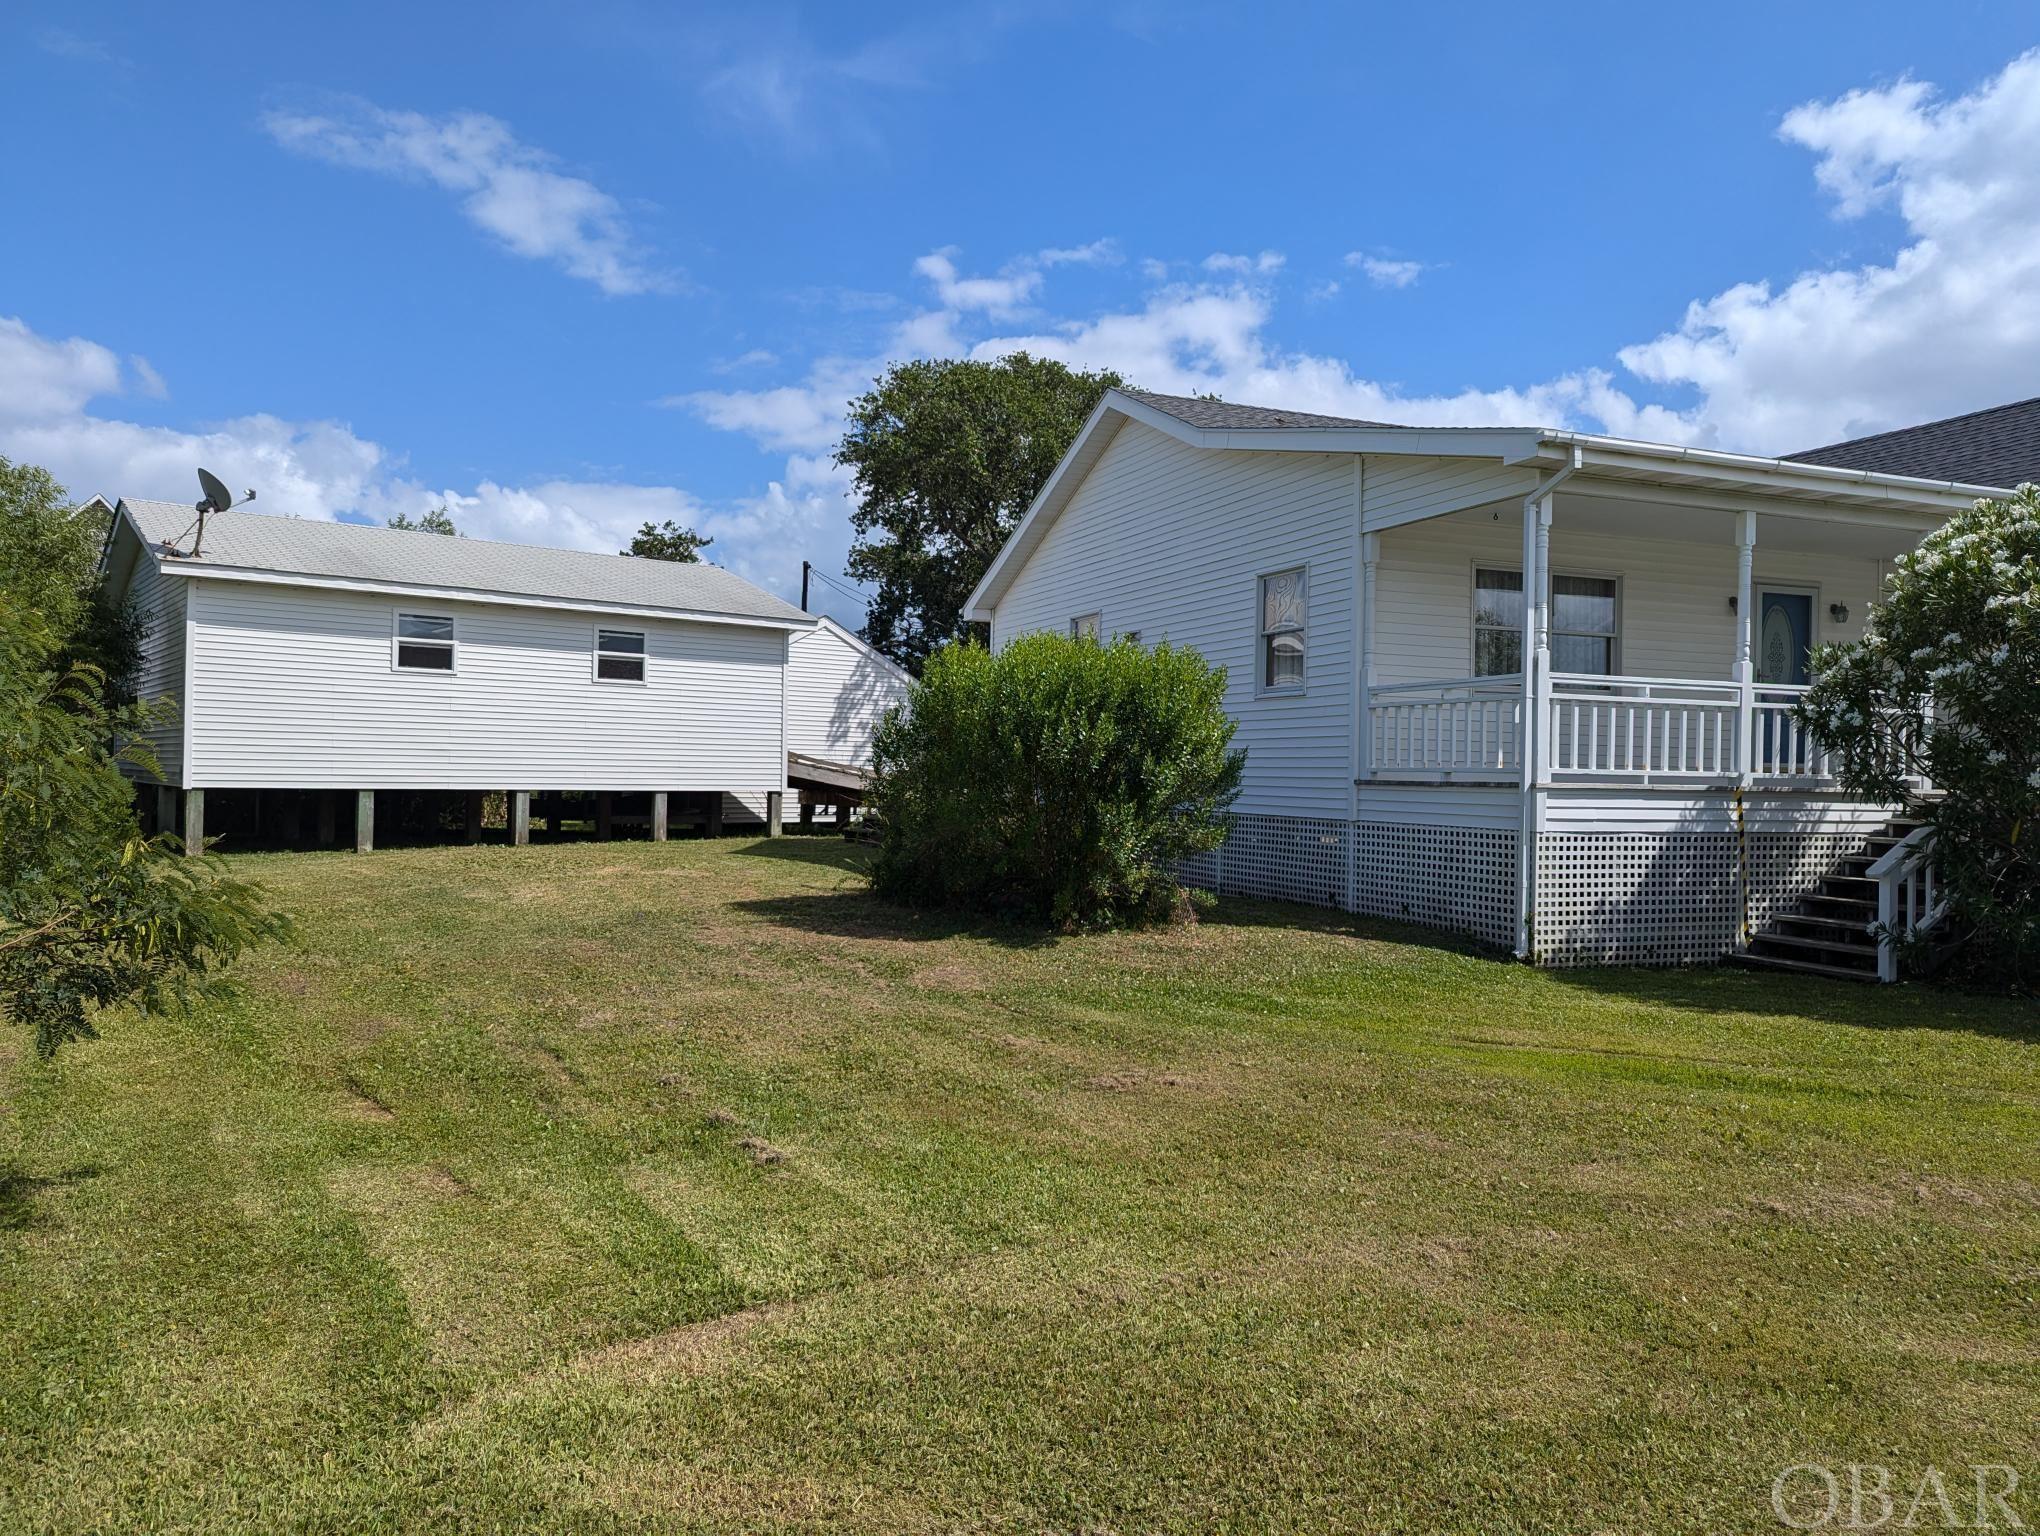 369 Lighthouse Road, Ocracoke, NC 27960, 2 Bedrooms Bedrooms, ,2 BathroomsBathrooms,Residential,For sale,Lighthouse Road,126070